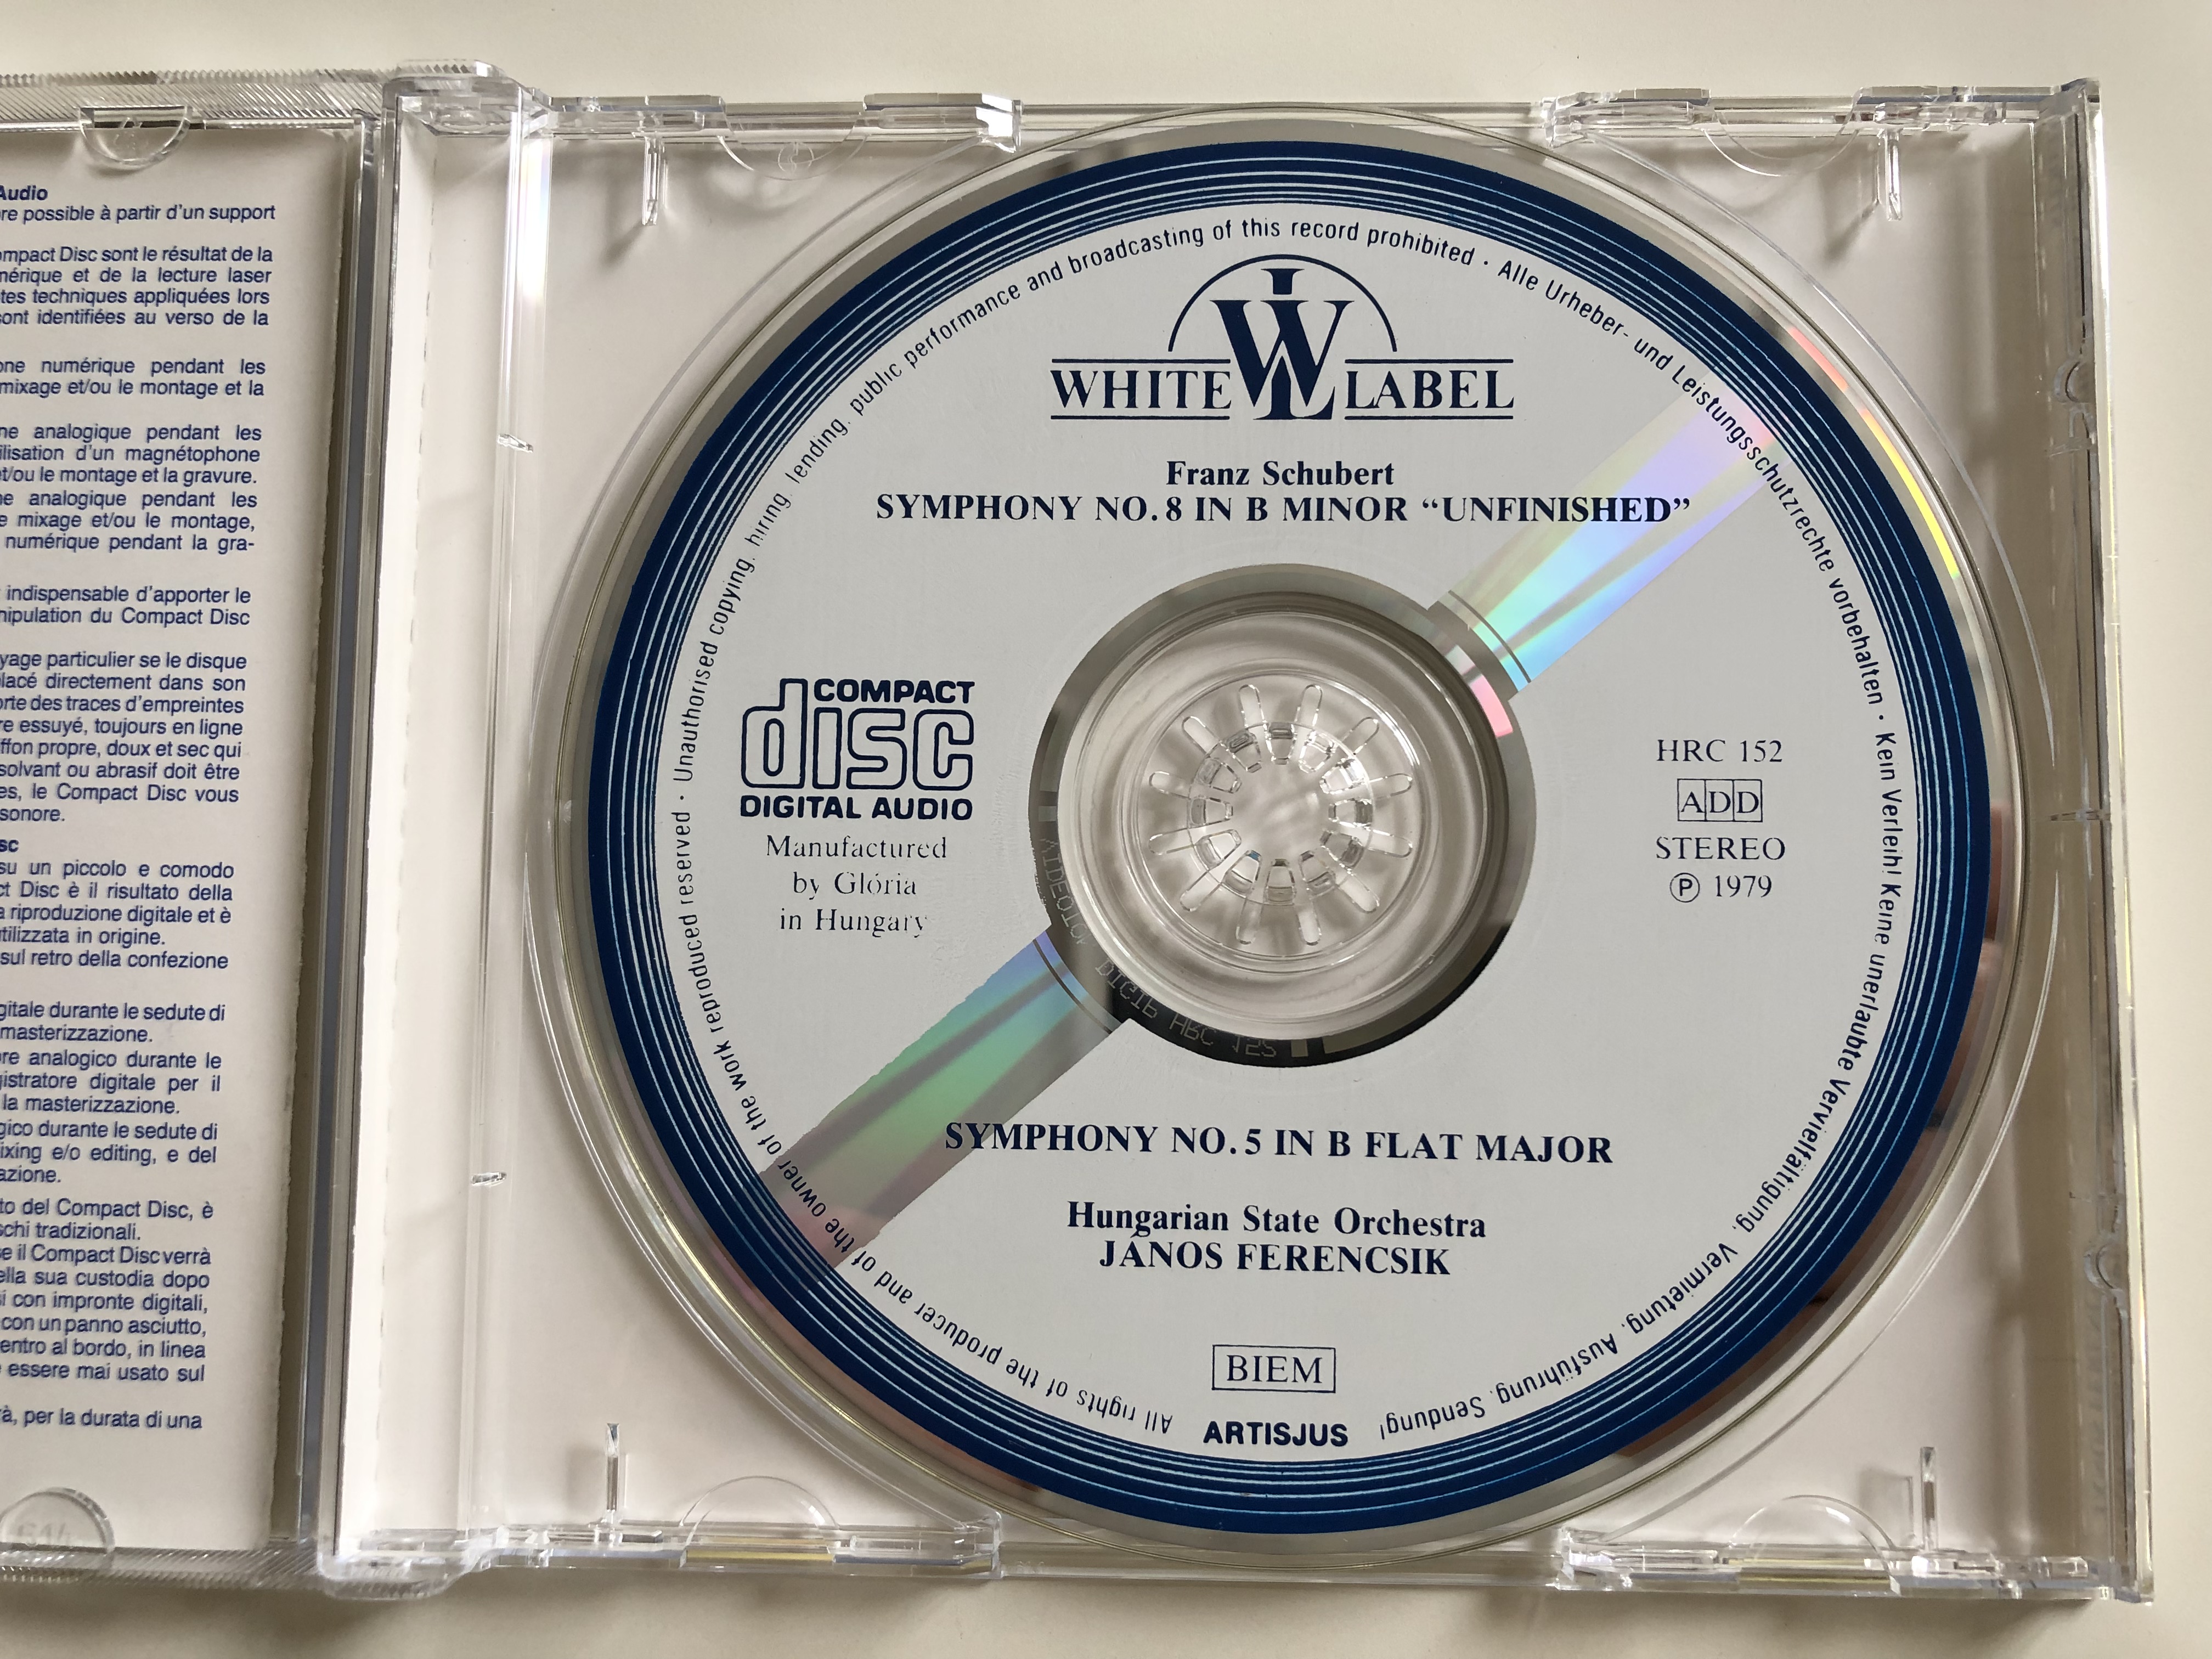 -franz-schubert-symphonies-no.-8-unfinished-no.-5-in-b-flat-major-hungarian-state-orchestra-conducted-by-j-nos-ferencsik-hungaroton-white-label-audio-cd-hrc-152-3-.jpg